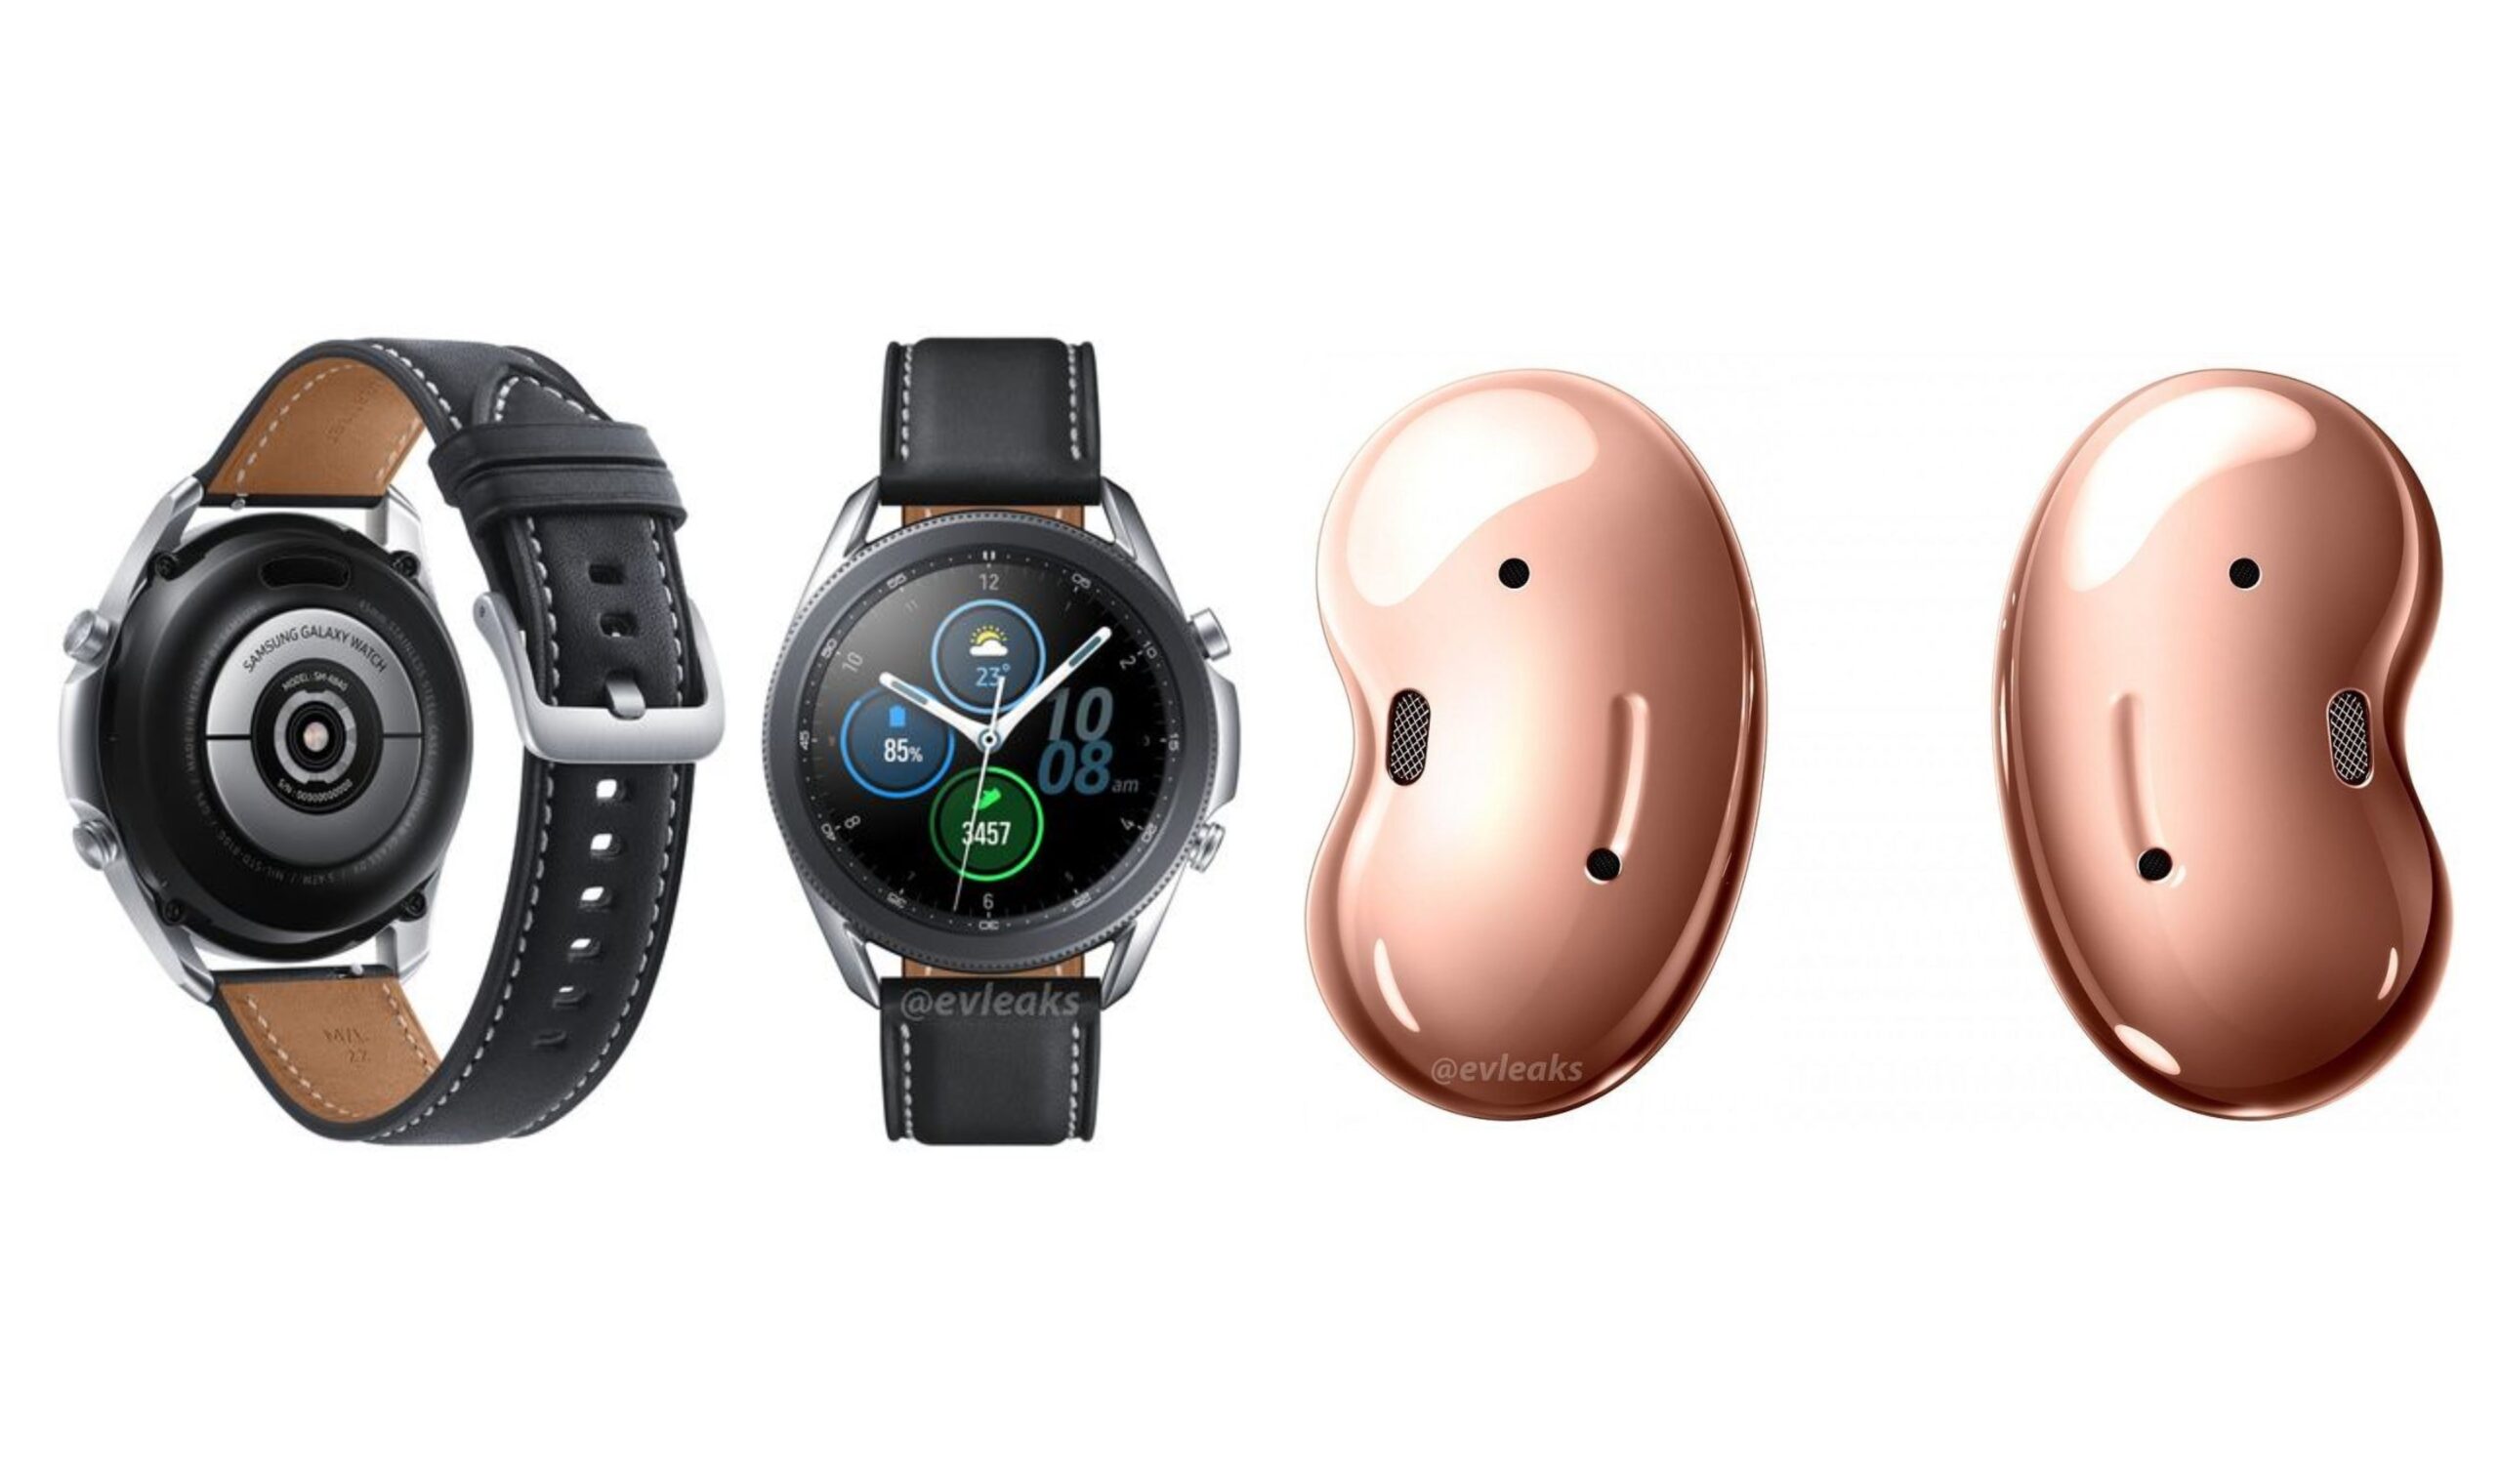 Galaxy Watch 3 and Galaxy Buds Live features revealed, courtesy of Samsung apps